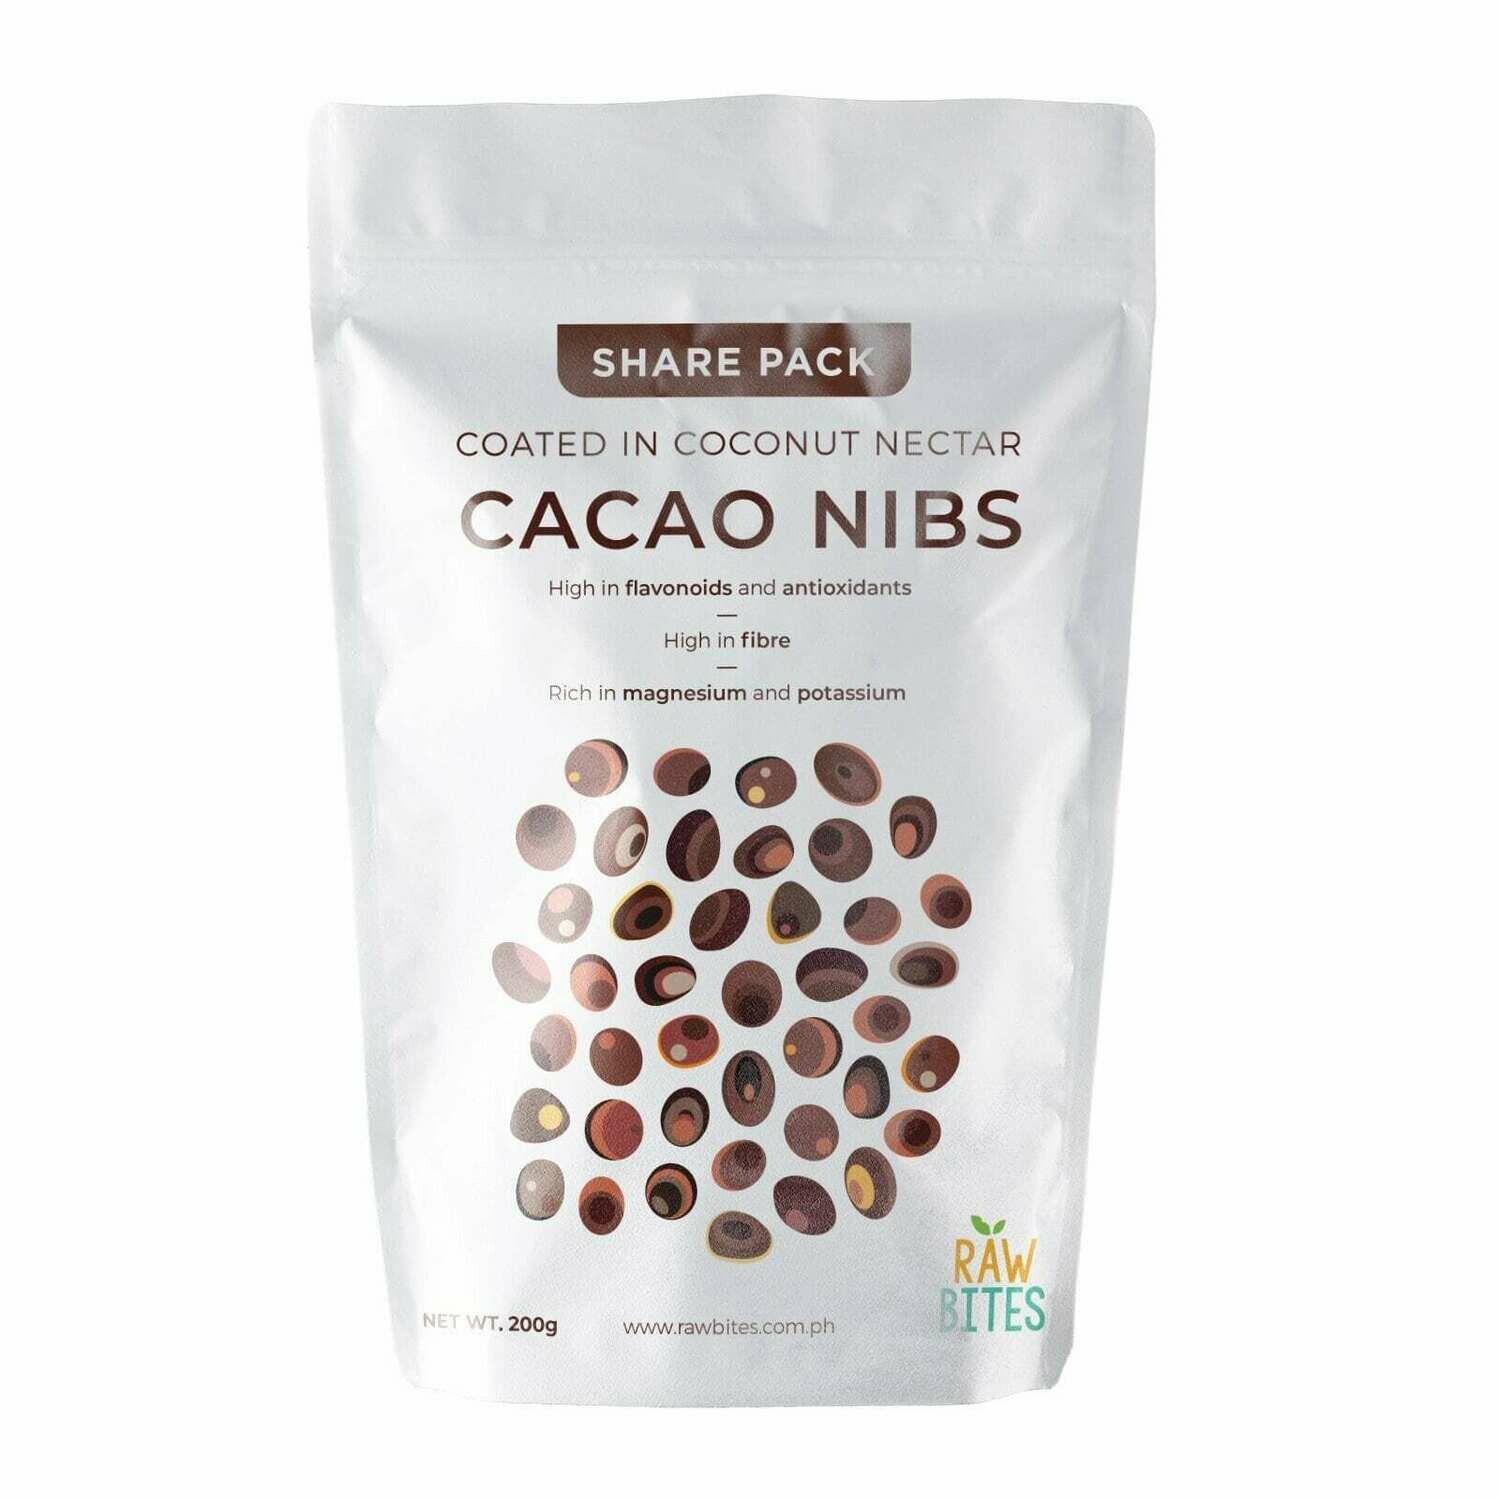 Raw Bites Cacao Nibs (coated with Coconut Nectar) 200g